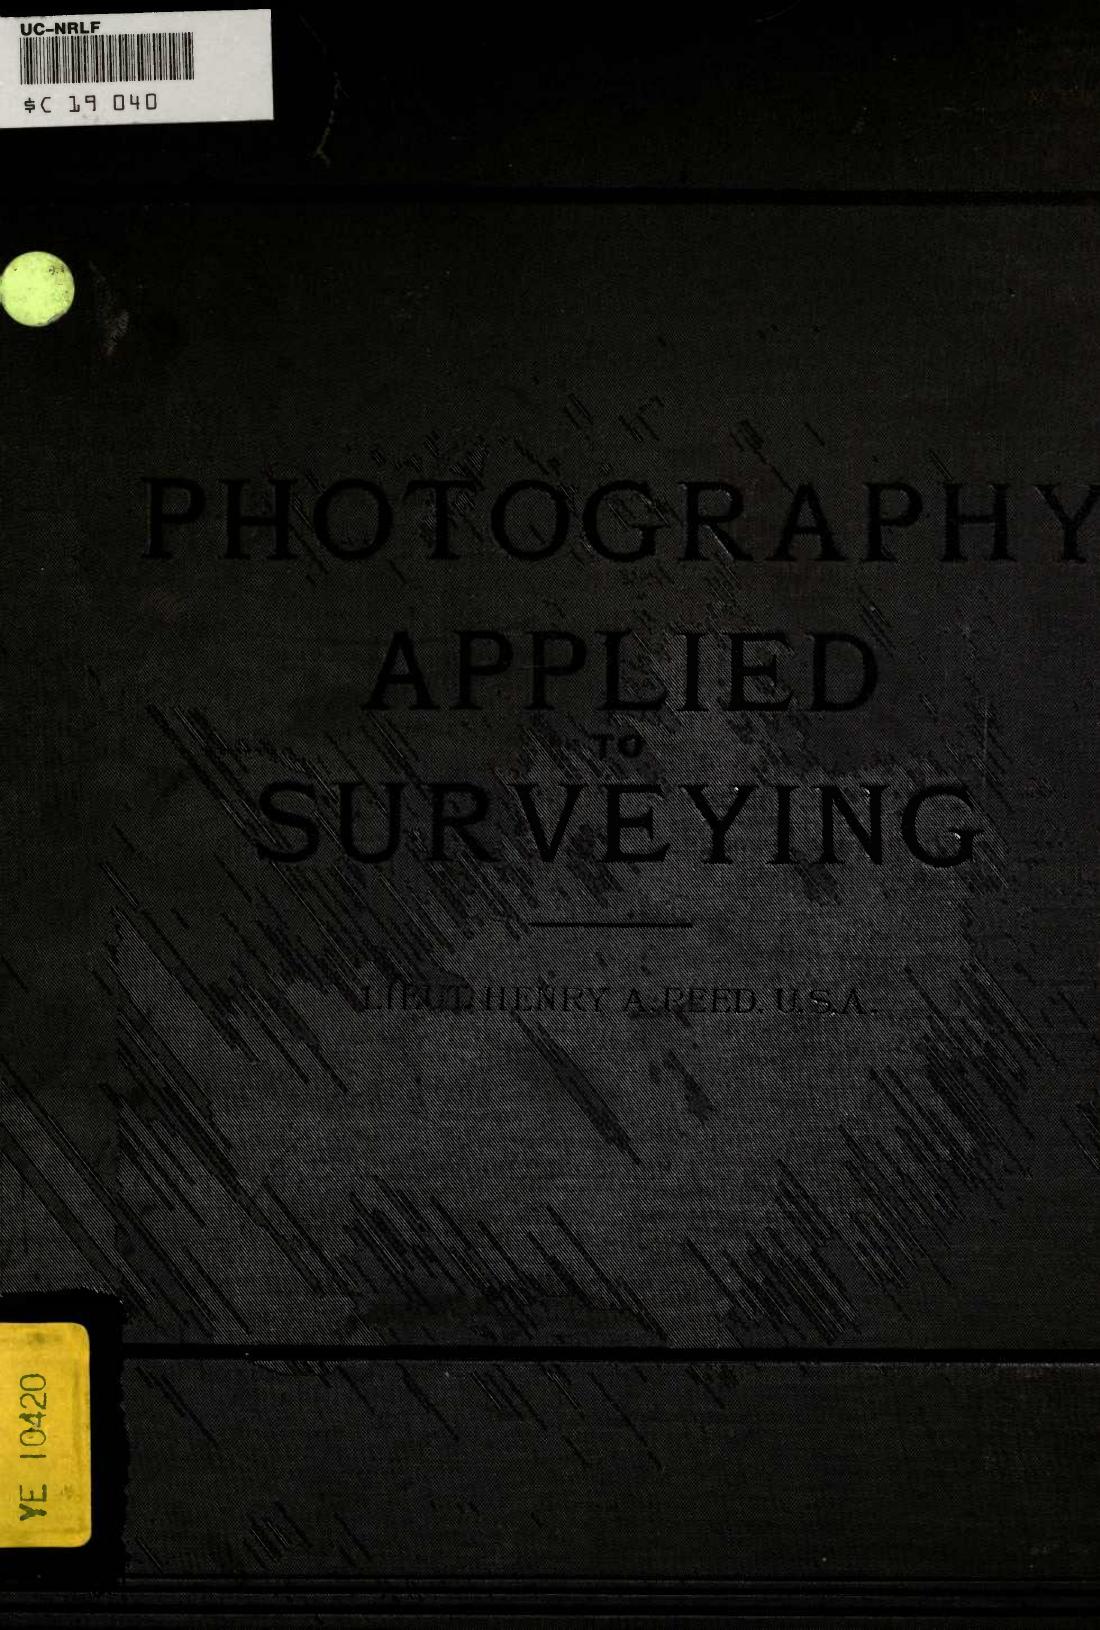 photography applied to surveying 'a' 2011